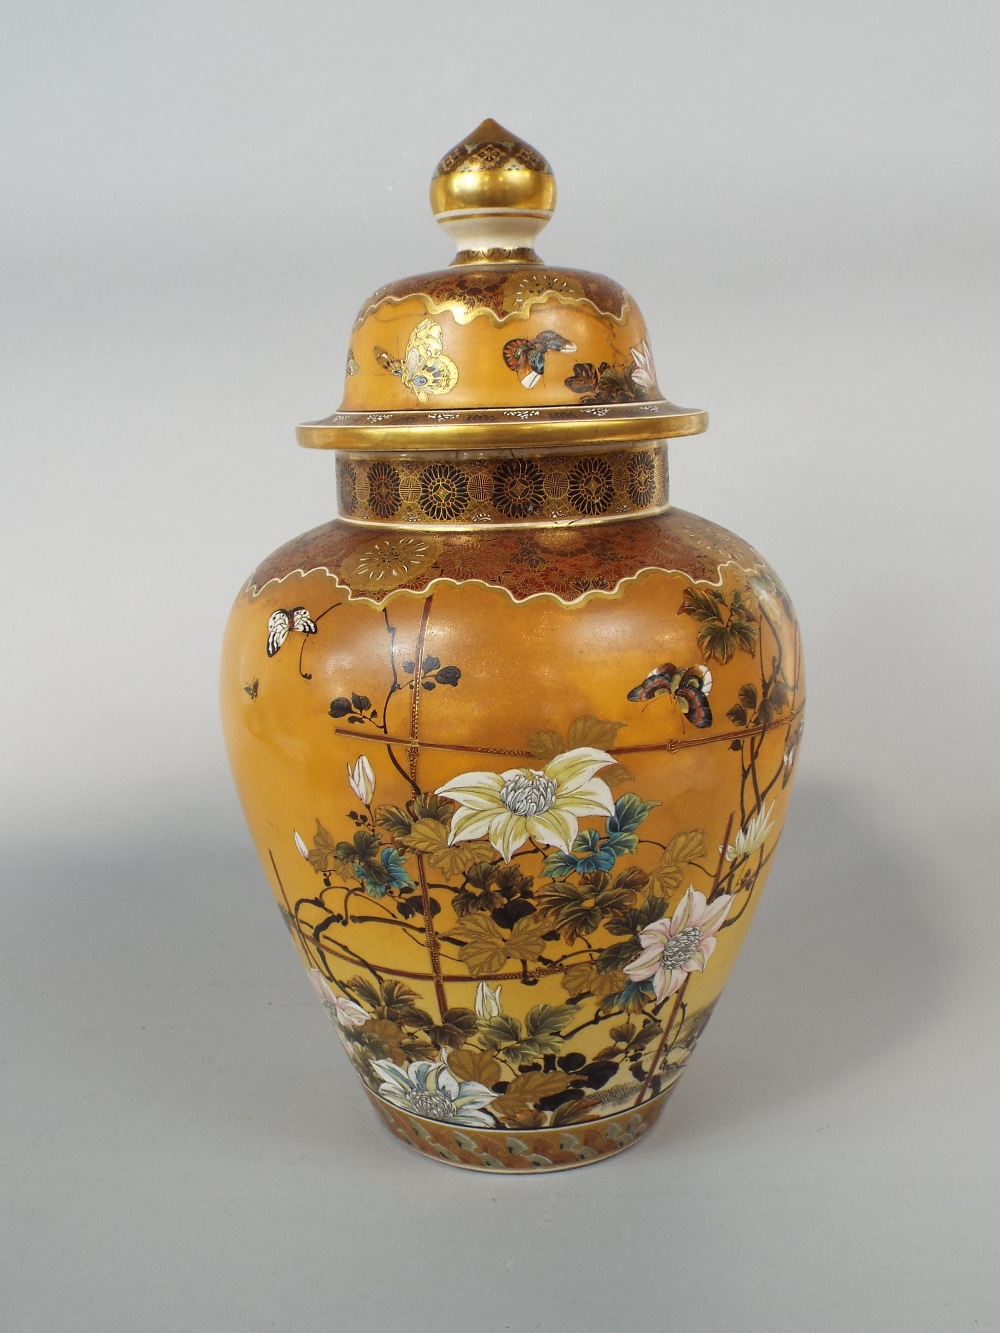 A substantial late 19th century Satsuma type vase and cover with polychrome painted floral and - Image 3 of 6